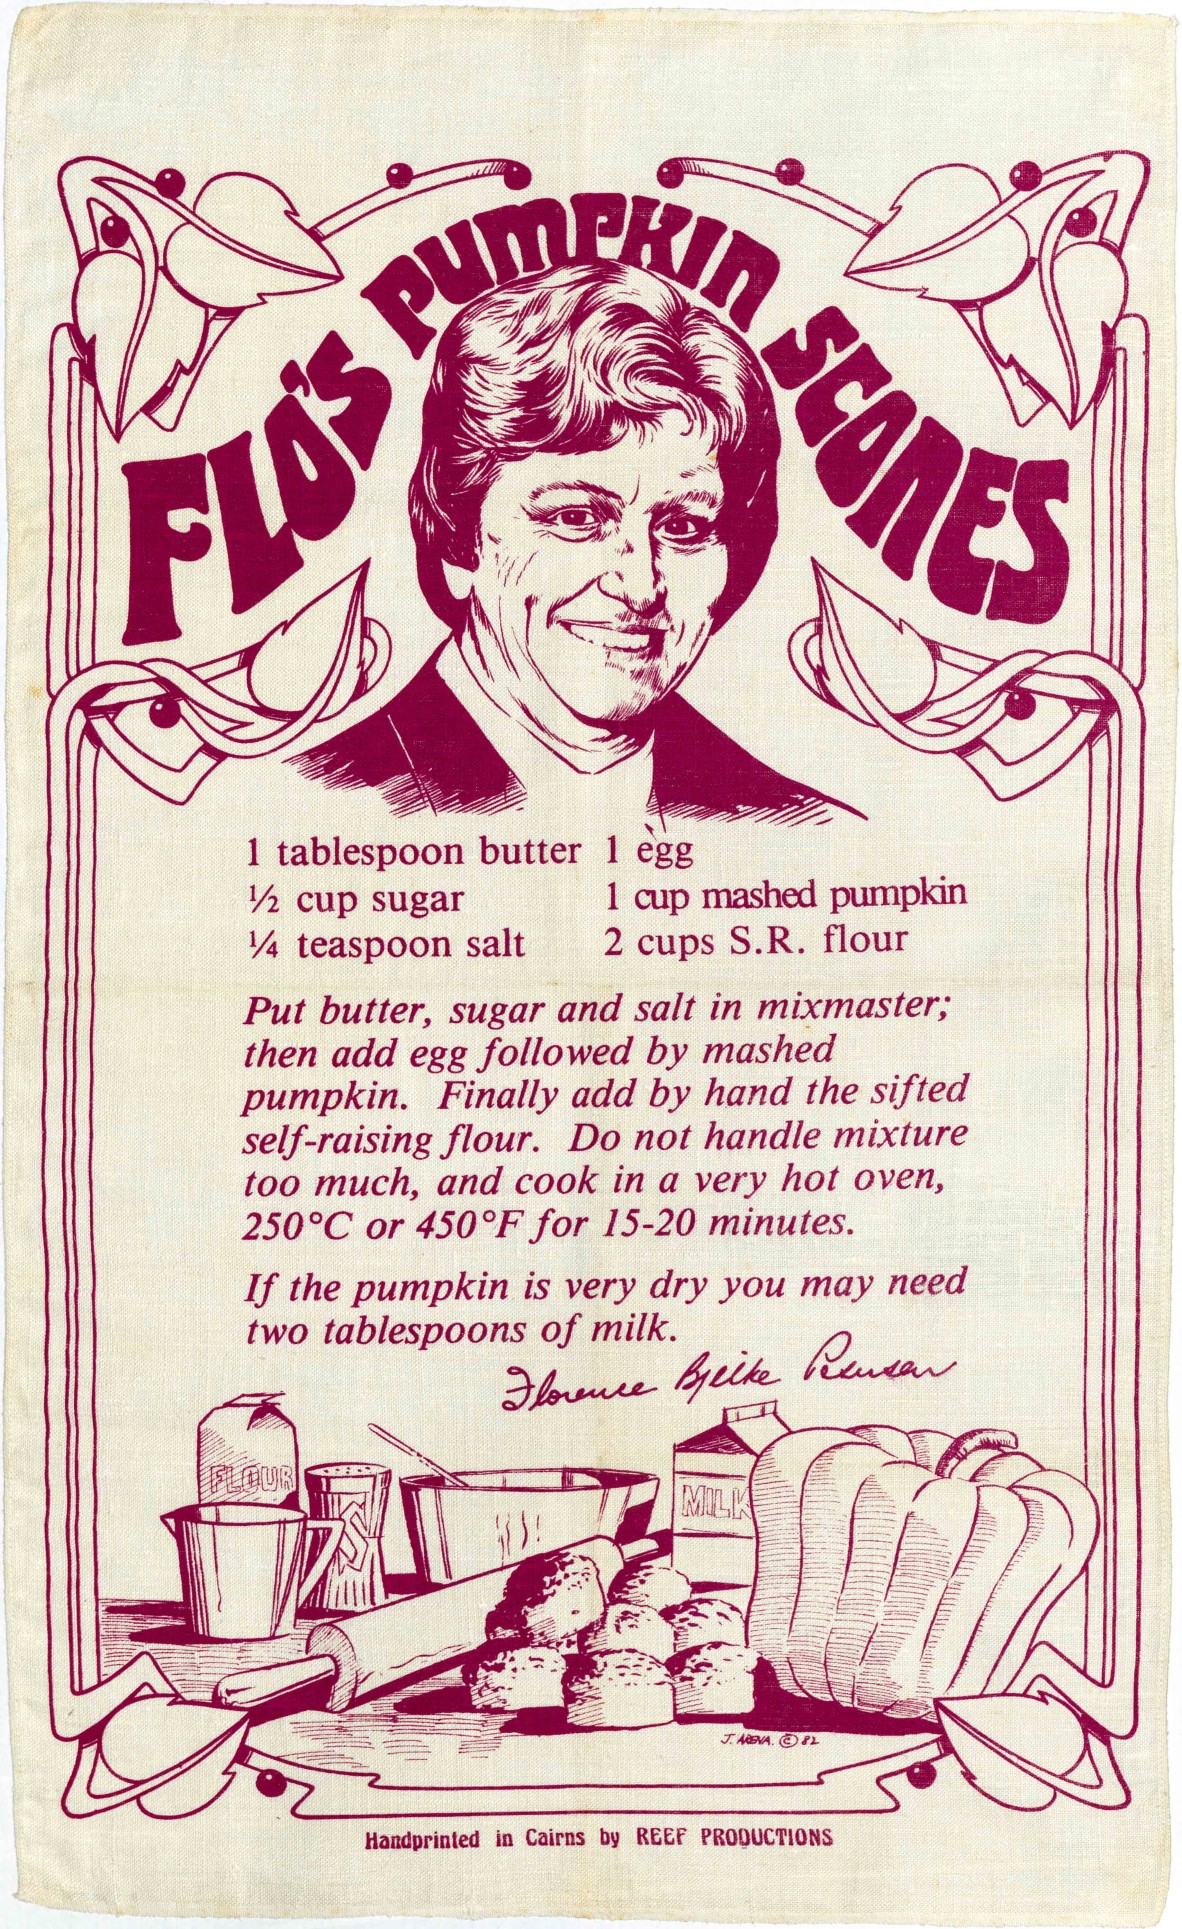 Tea towel with maroon text and photo of Lady Flo Bjelke-Petersen with text: Flo’s pumpkin scones   1 tablespoon butter  ½ cup sugar  ¼ teaspoon salt  1 egg  1 cup mashed pumpkin  2 cups self-raising flour   Put butter, sugar and salt in mixmaster; then add egg followed by mashed pumpkin. Finally add by hadn the sifted self-raising flour. Do not handle mixture too much, and cook it in a very hot oven, 250C or 450F for 15-20 minutes.   If the pumpkin is very dry you may need 2 tablespoons of milk.   Florence 